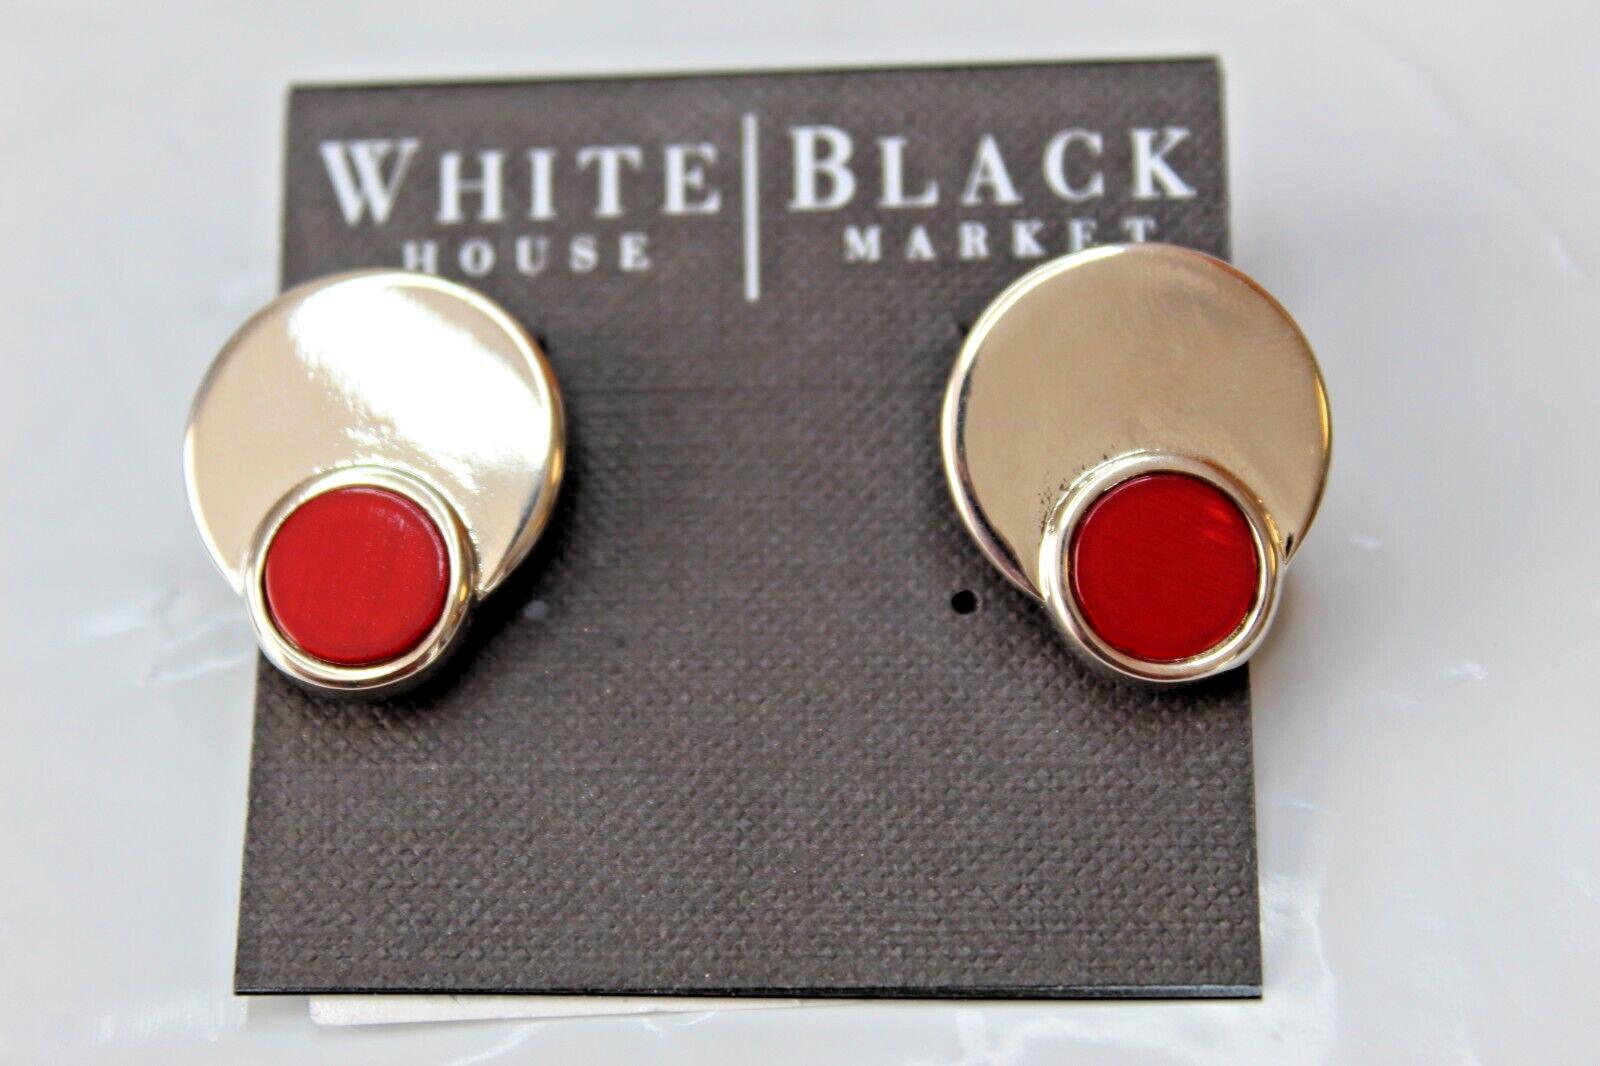 White House Black Market Clip On Earrings Red & Silver Metal Circles New - $17.79